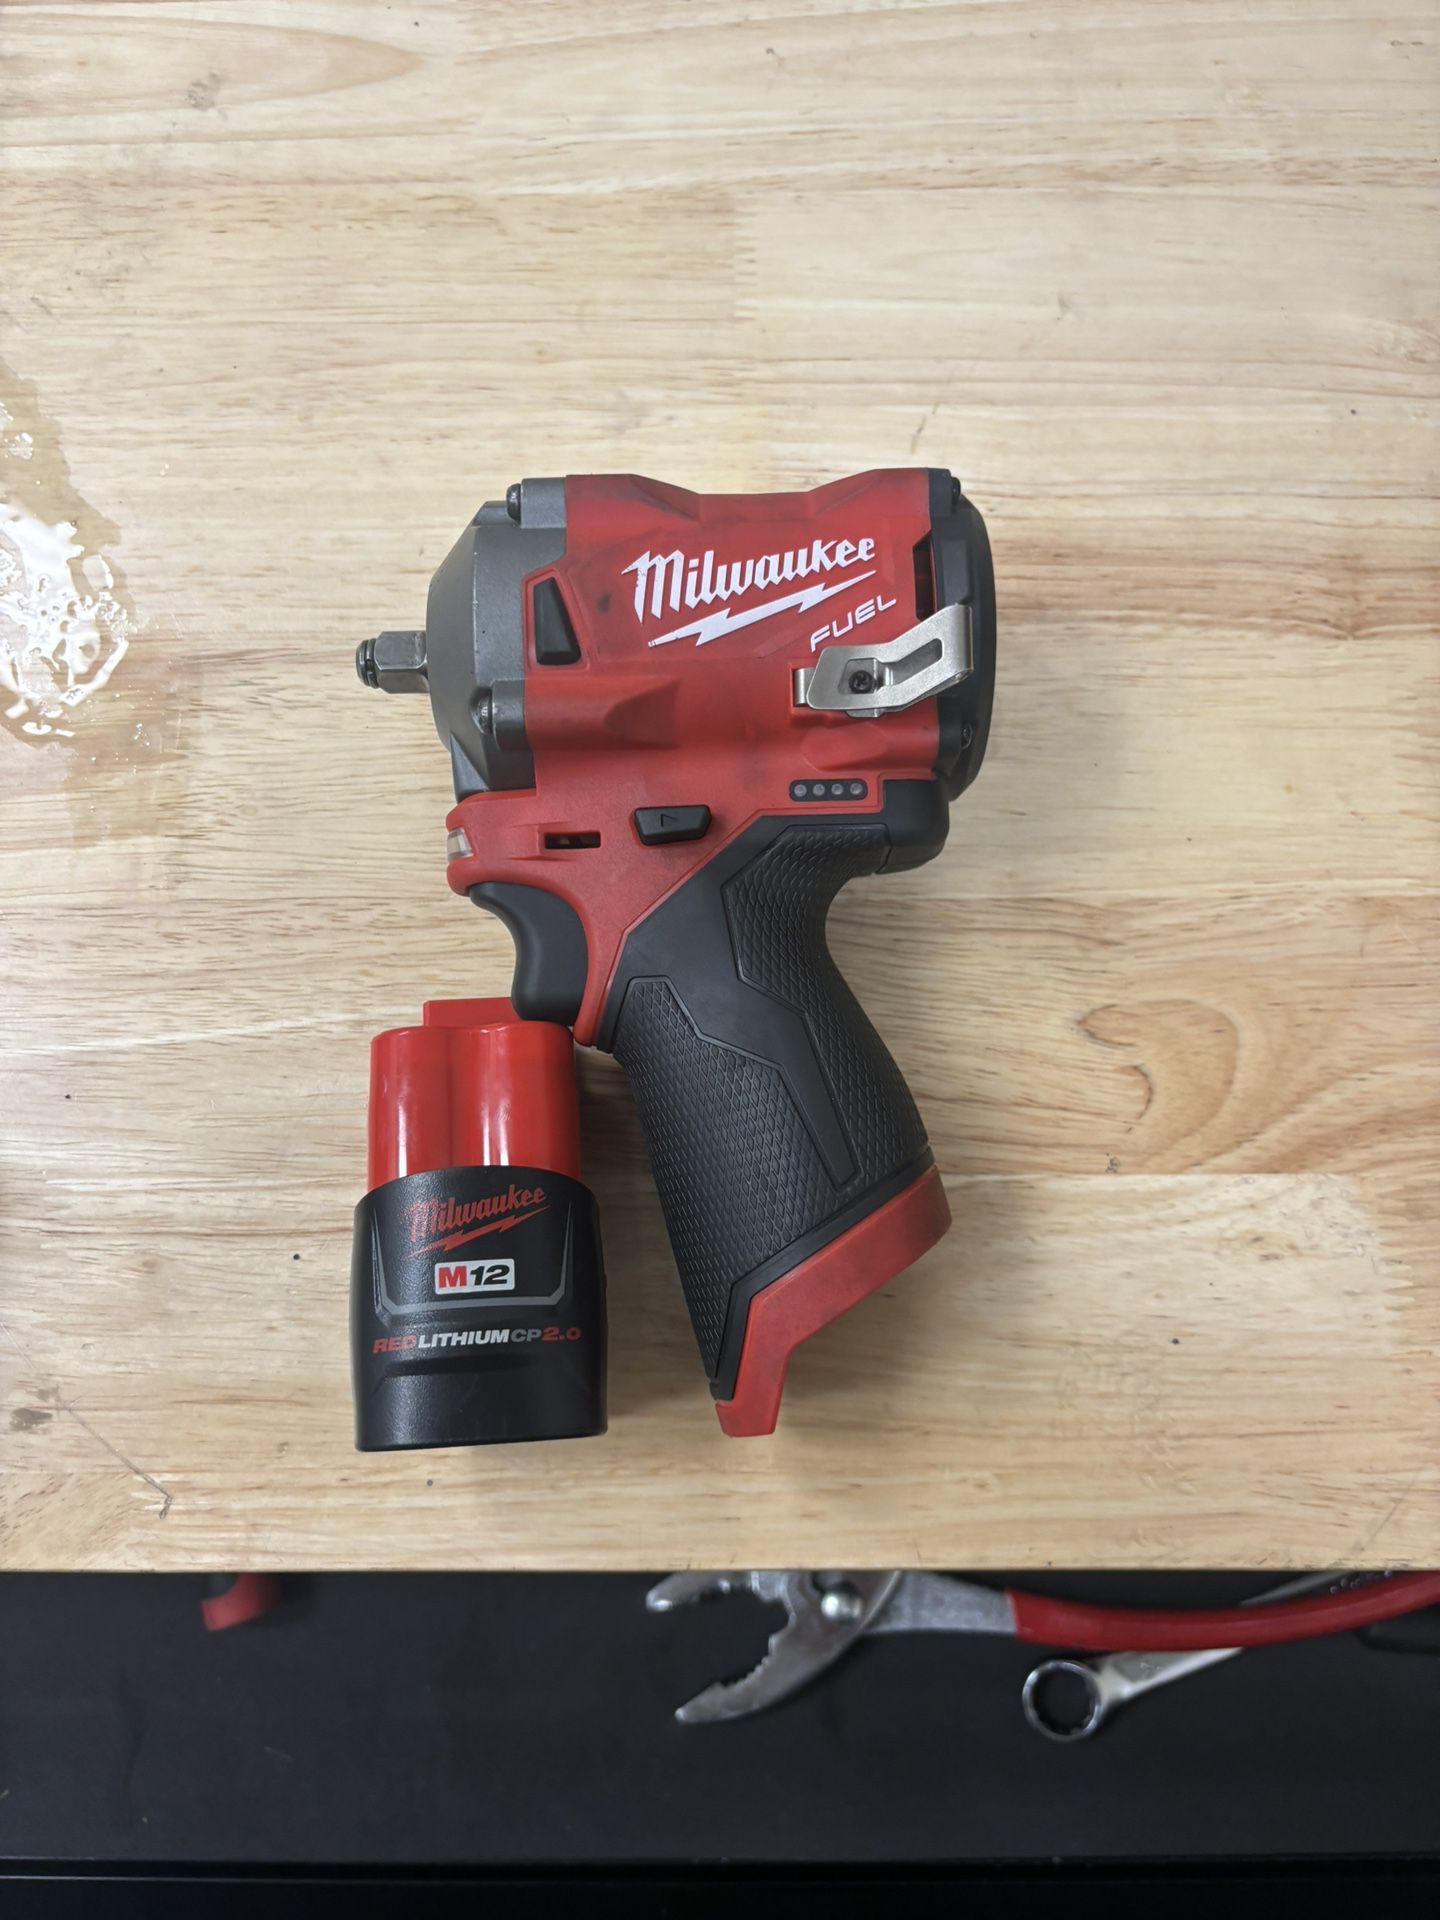 Milwaukee 3/8 Impact Wrench “stubby” Used Handful Of Times 